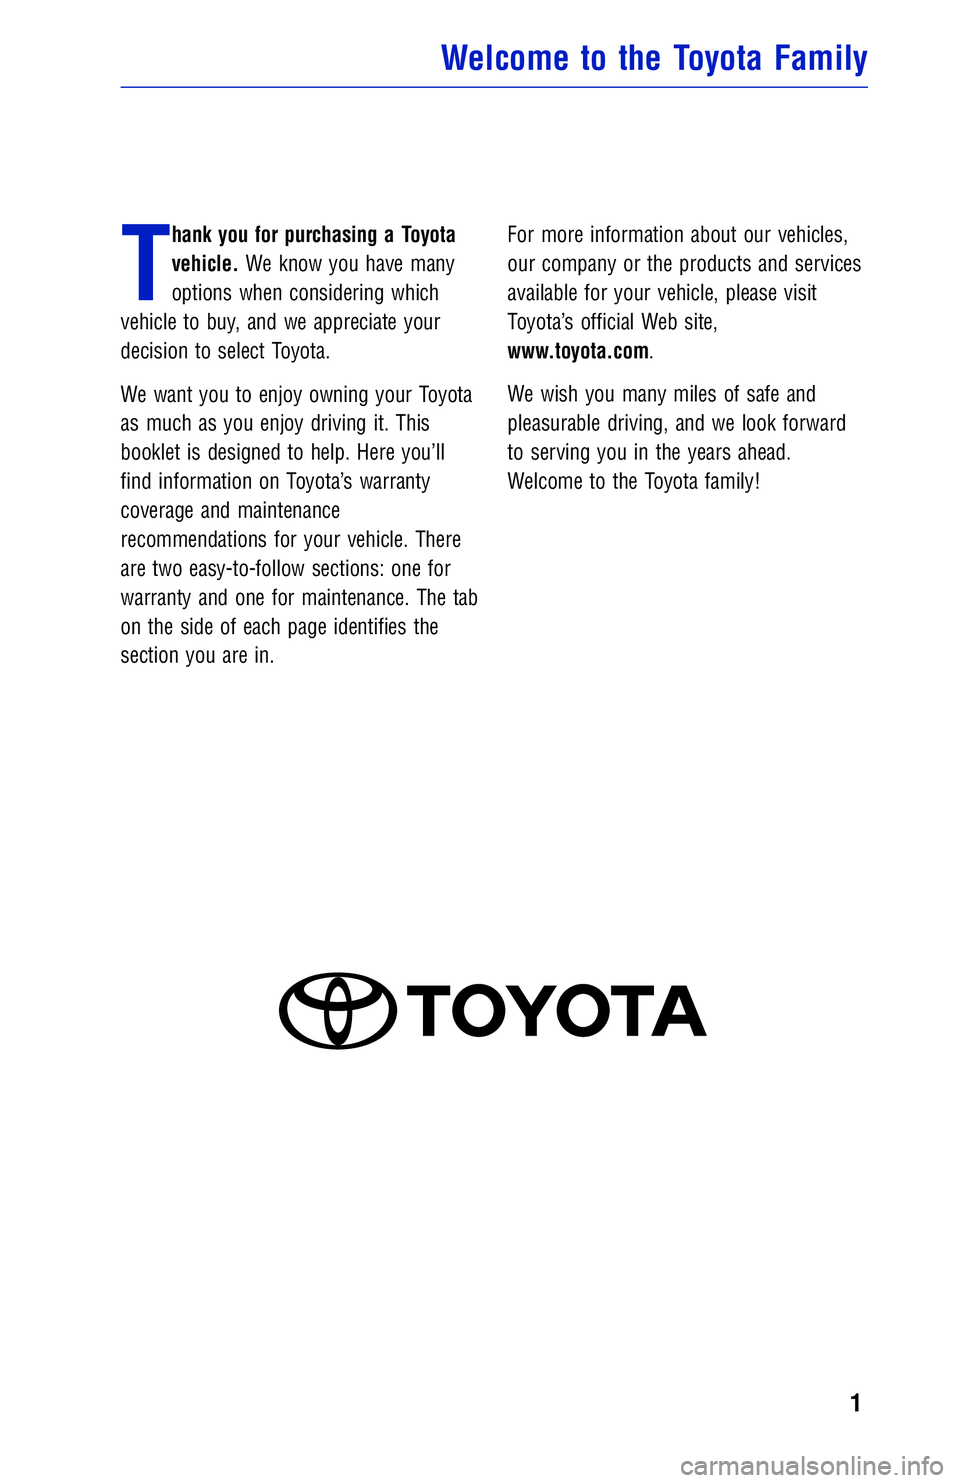 TOYOTA TACOMA 2018  Warranties & Maintenance Guides (in English) JOBNAME: 2878019-en-2018_Taco PAGE: 1 SESS: 4 OUTPUT: Mon Sep 25 11:49:43 2017
/InfoShareAuthorCODA/InfoShareAuthorCODA/TS_Warr_Maint/2878019-en-2018_T\
acoma.00505-18WMG-TAC_vX/TS_Warr_Maint_v1
T
han